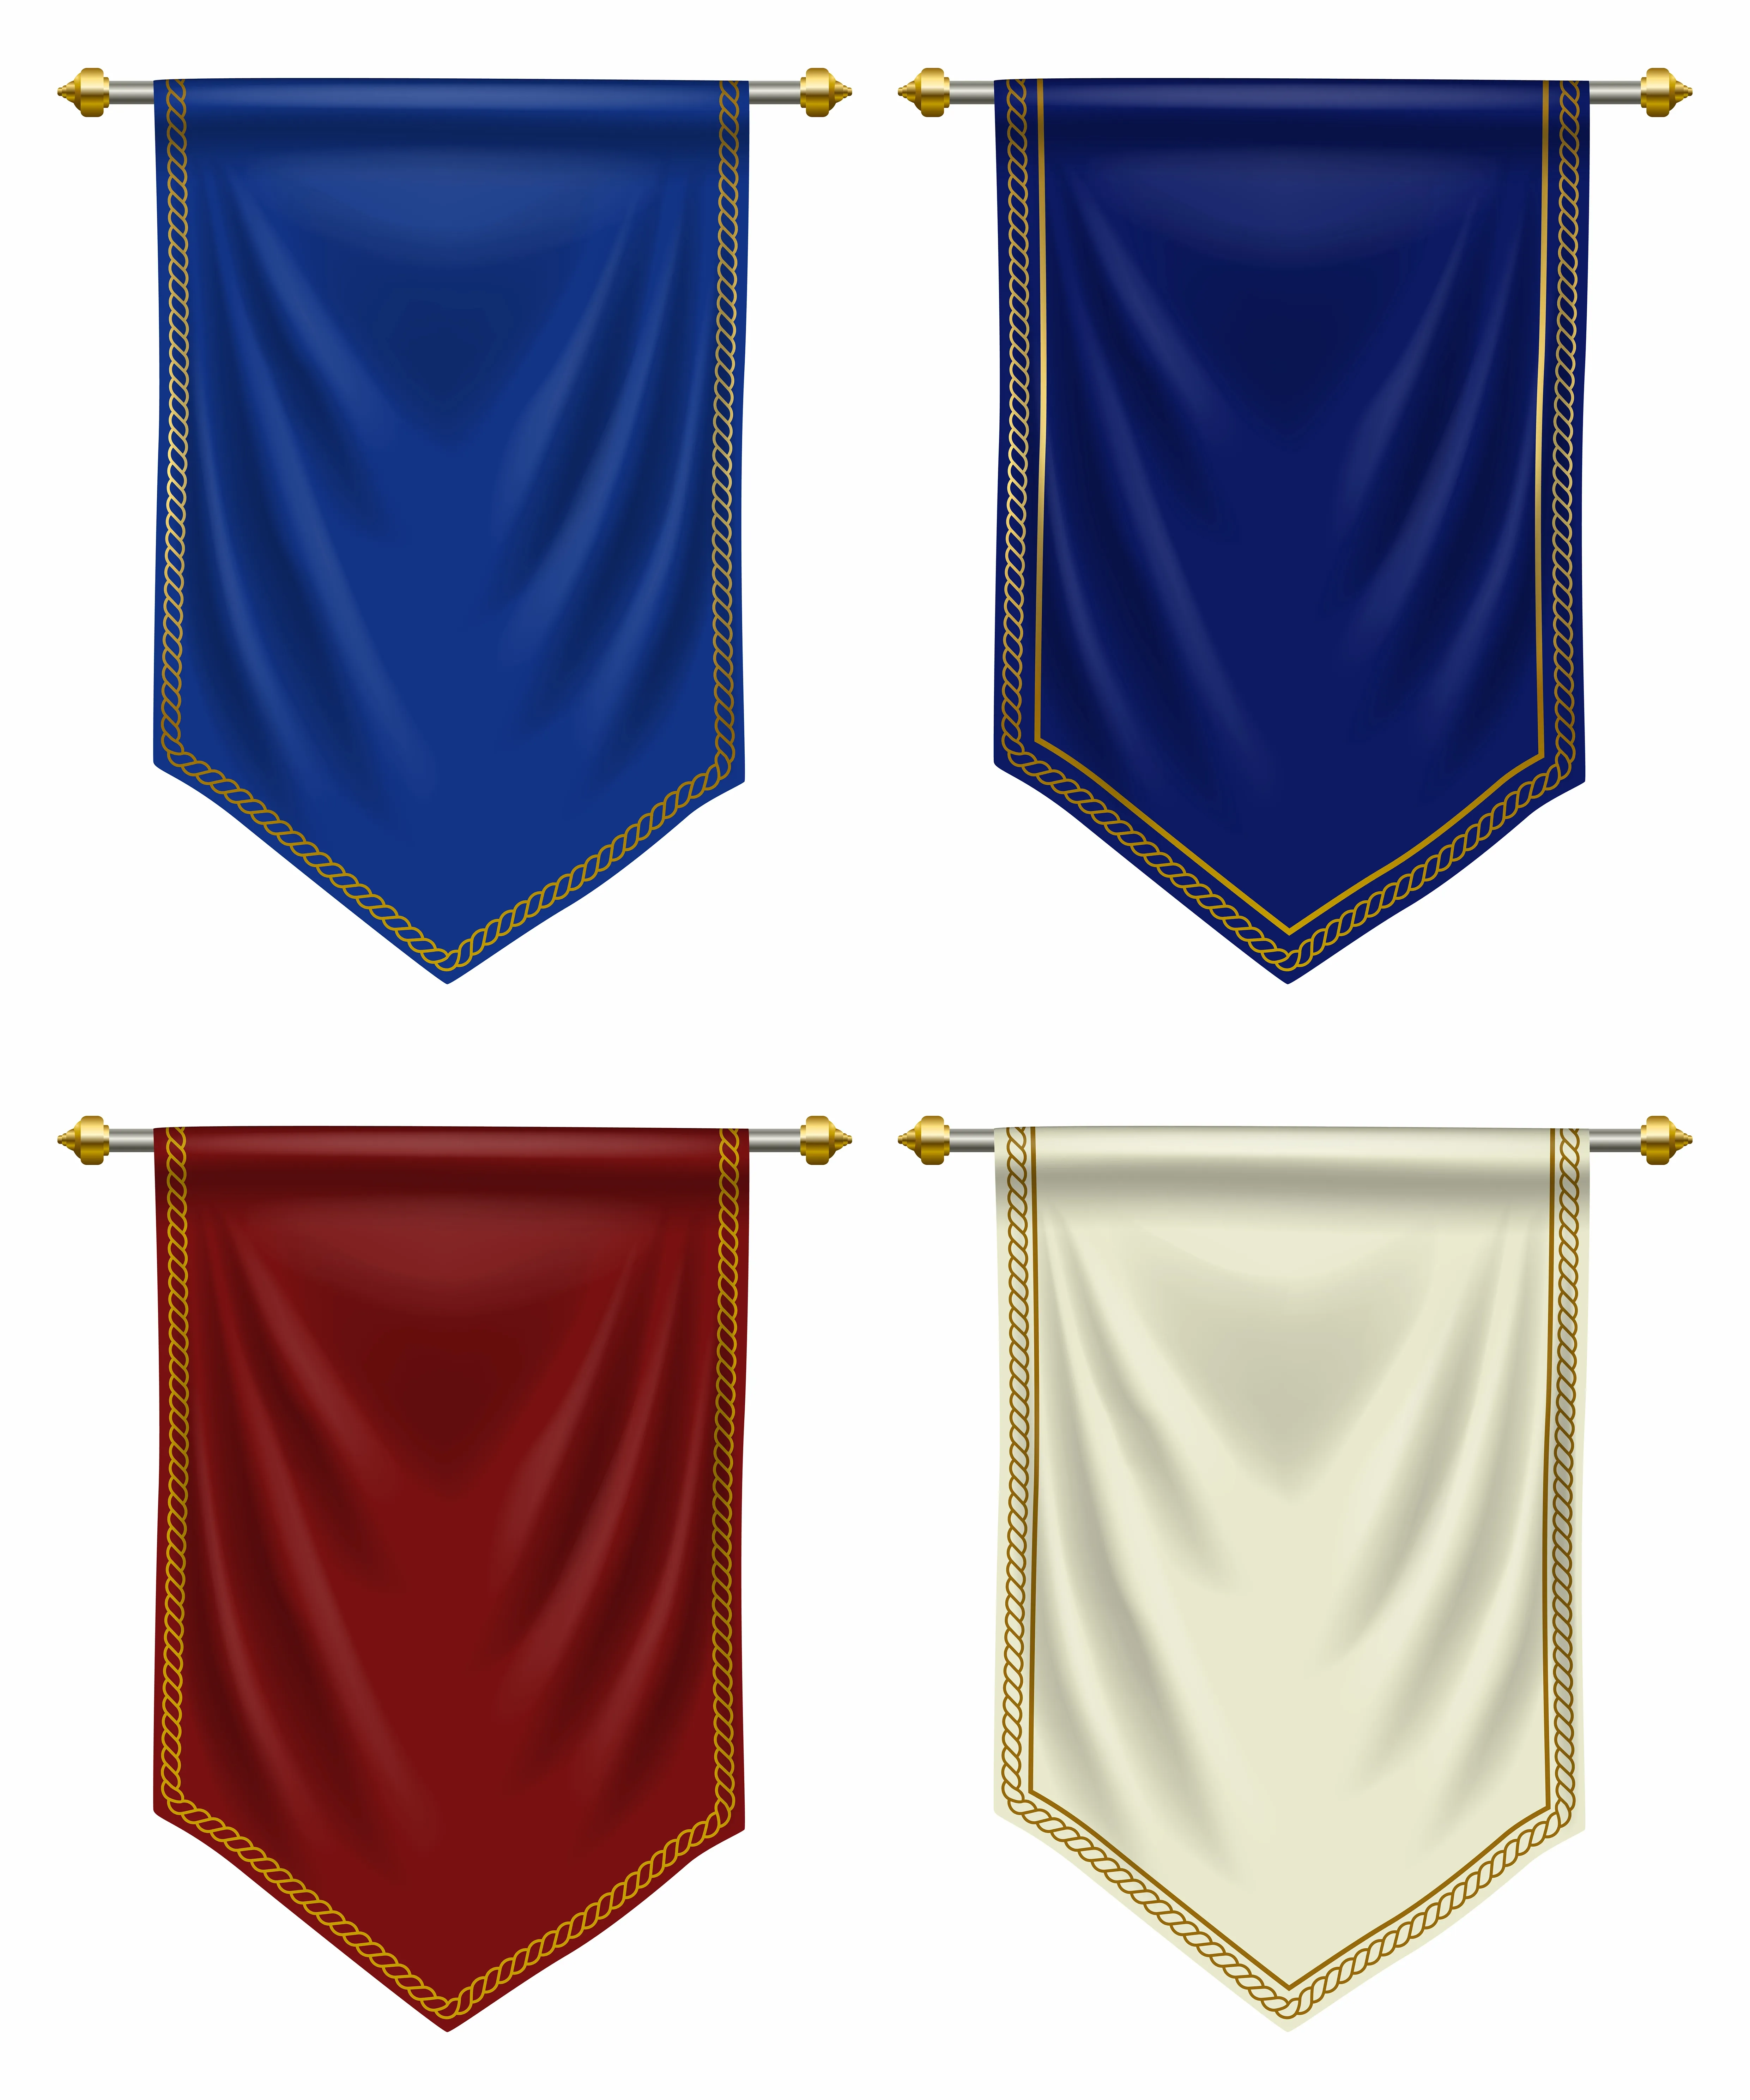 Luxury royal blue pennant for premium brand identity or label. vector illustration